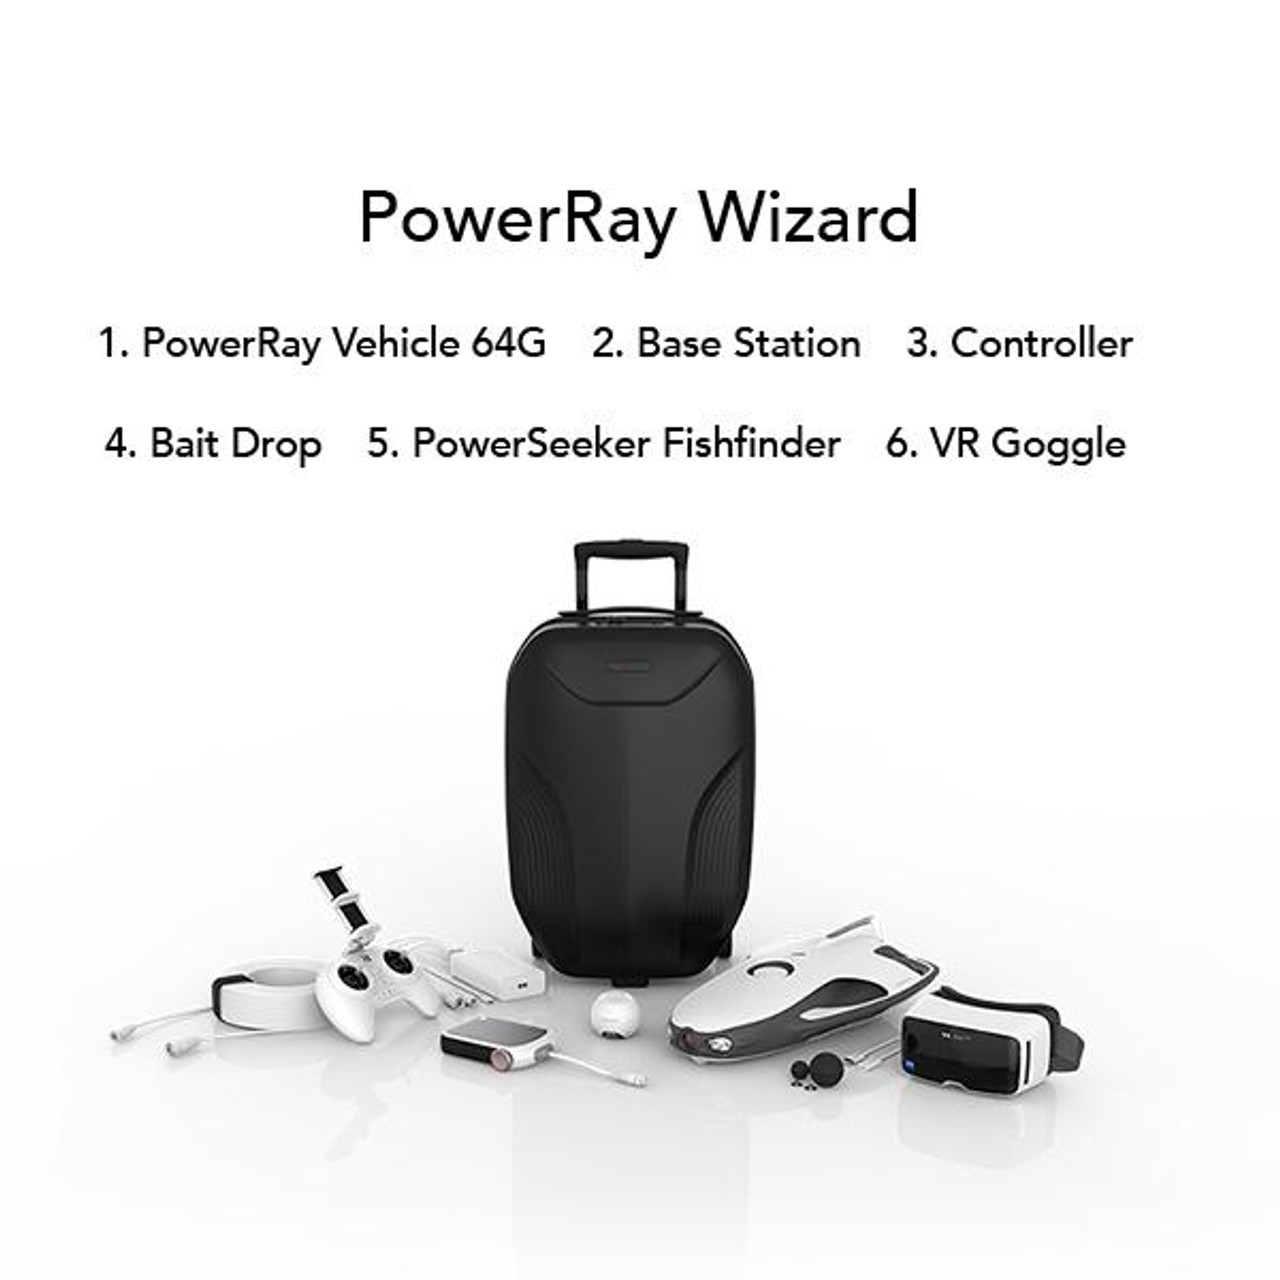 Power Ray Wizard Underwater 4k Drone with Bait Drop and Fish Finder